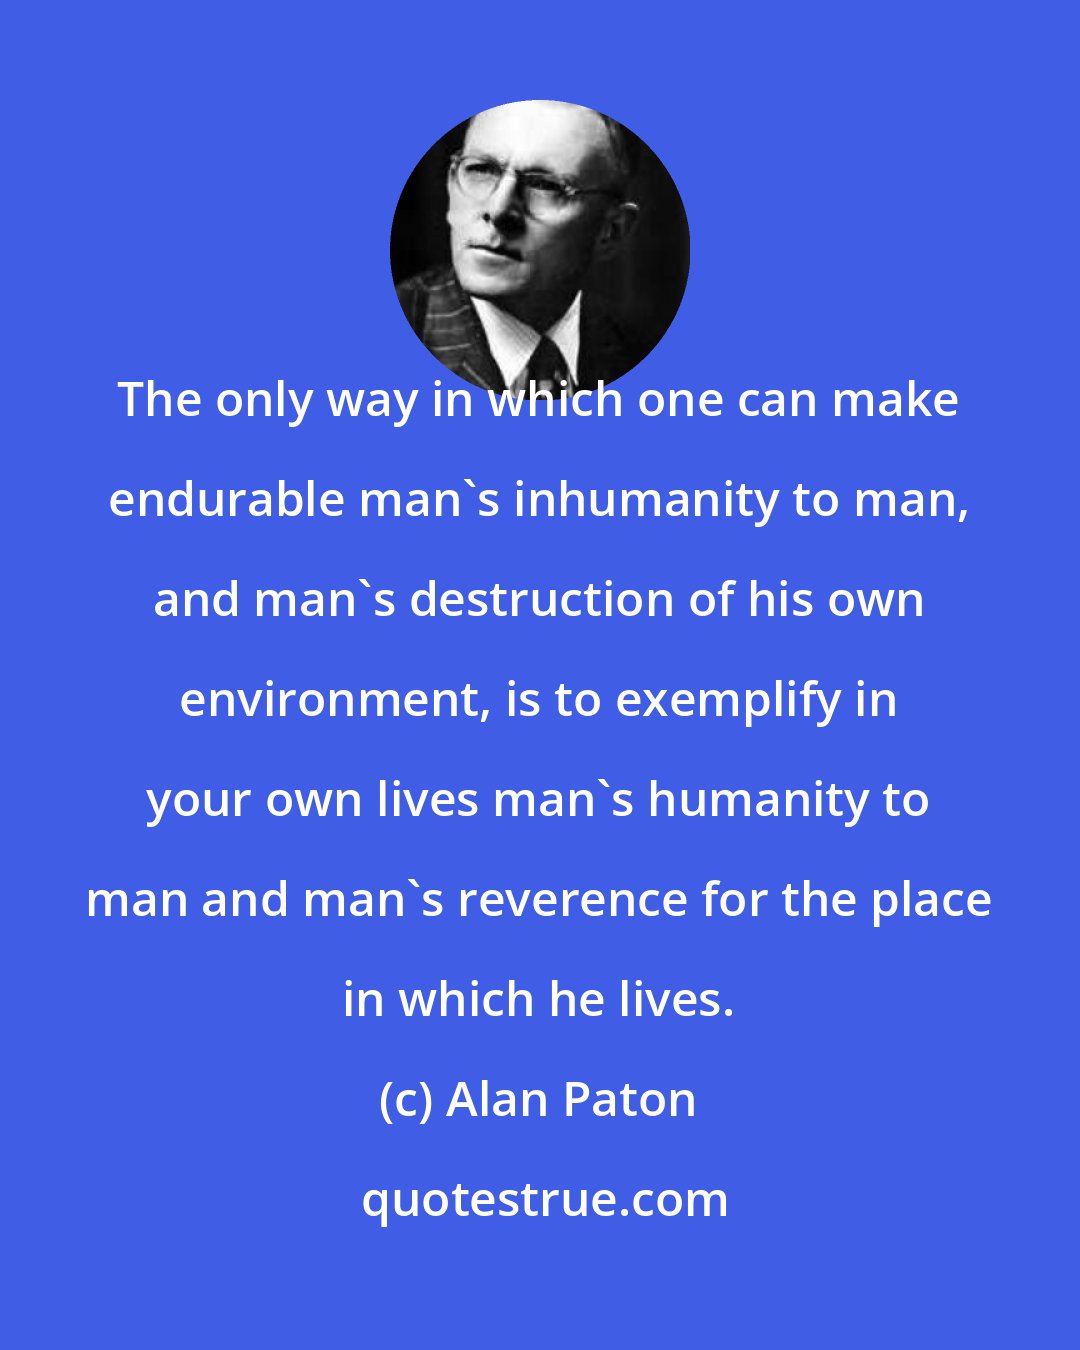 Alan Paton: The only way in which one can make endurable man's inhumanity to man, and man's destruction of his own environment, is to exemplify in your own lives man's humanity to man and man's reverence for the place in which he lives.